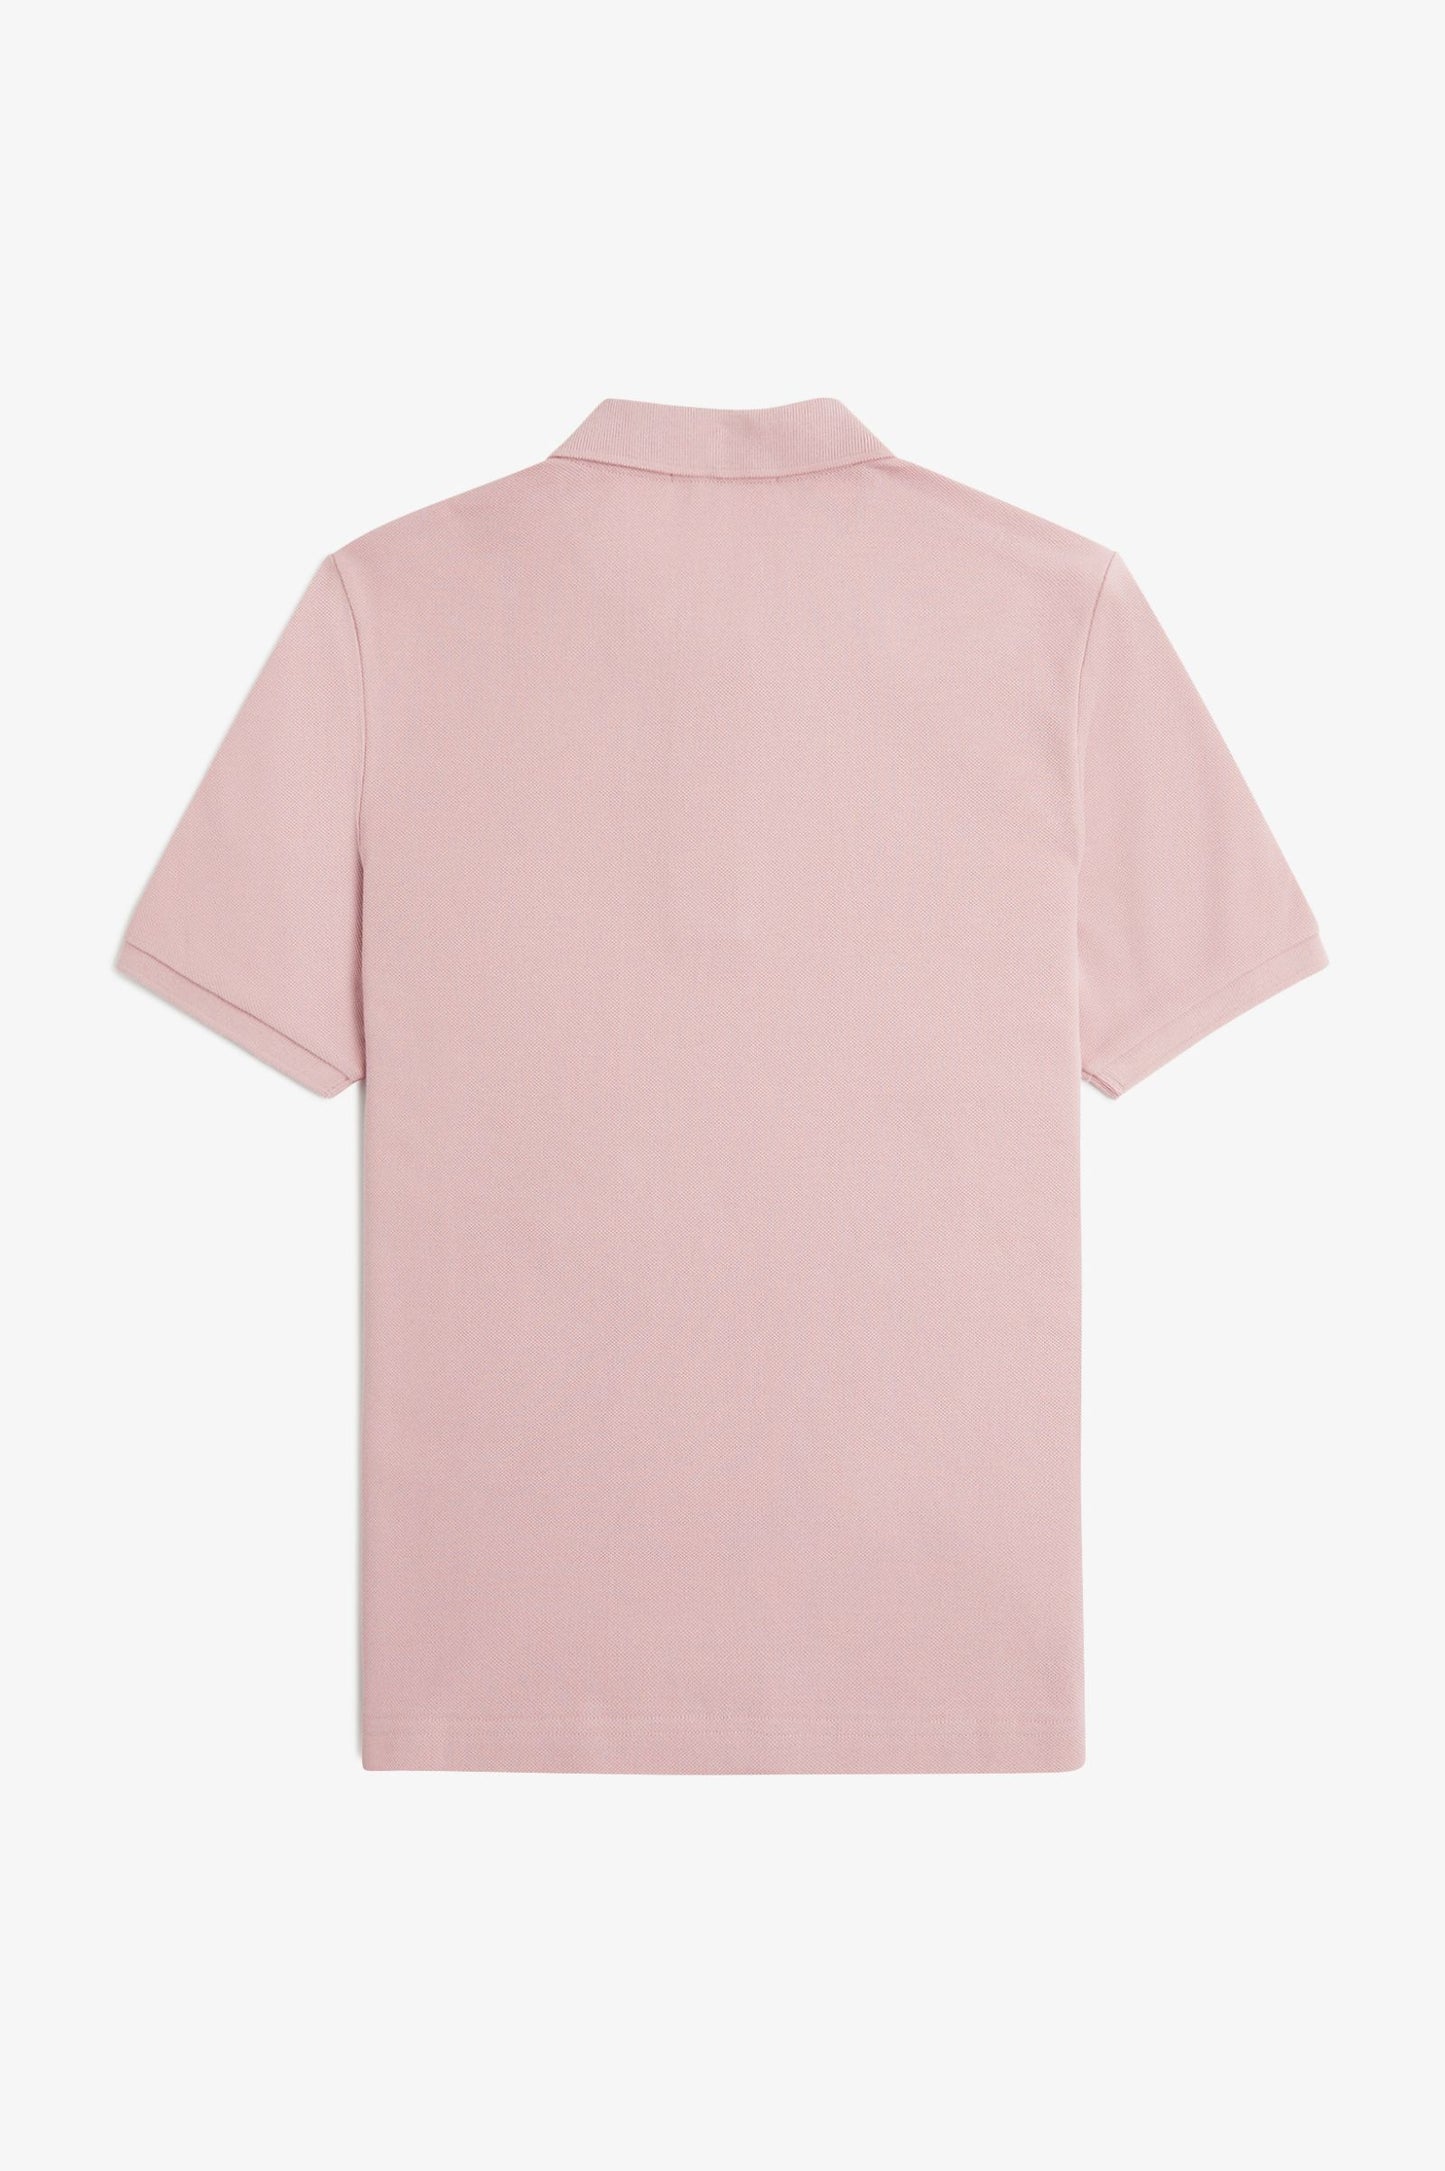 FP FRED PERRY SHIRT